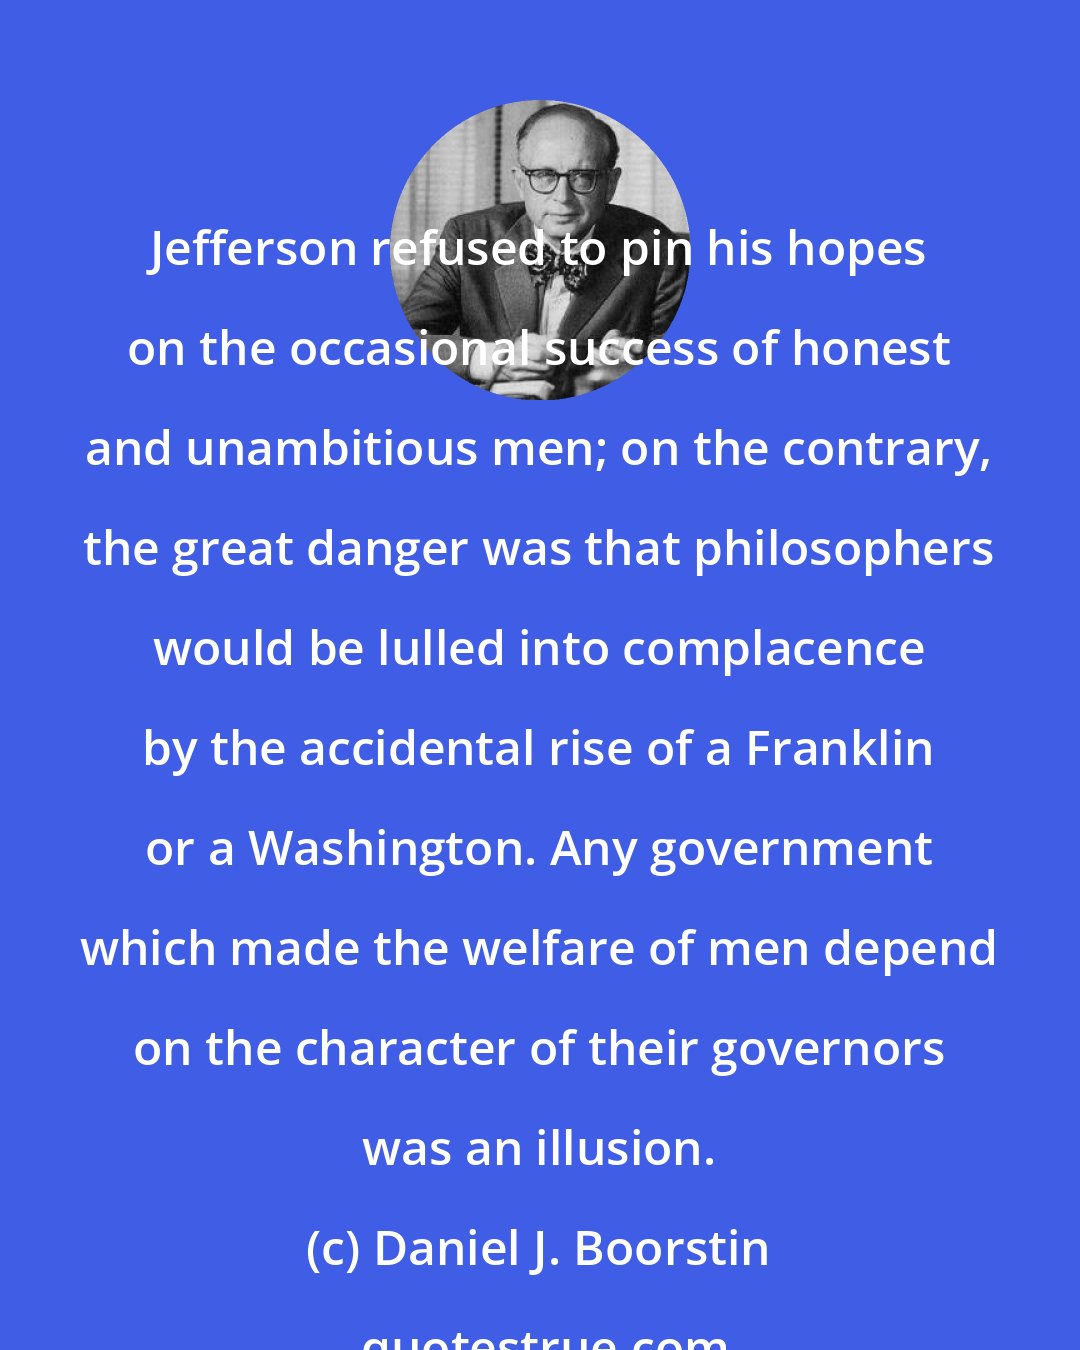 Daniel J. Boorstin: Jefferson refused to pin his hopes on the occasional success of honest and unambitious men; on the contrary, the great danger was that philosophers would be lulled into complacence by the accidental rise of a Franklin or a Washington. Any government which made the welfare of men depend on the character of their governors was an illusion.